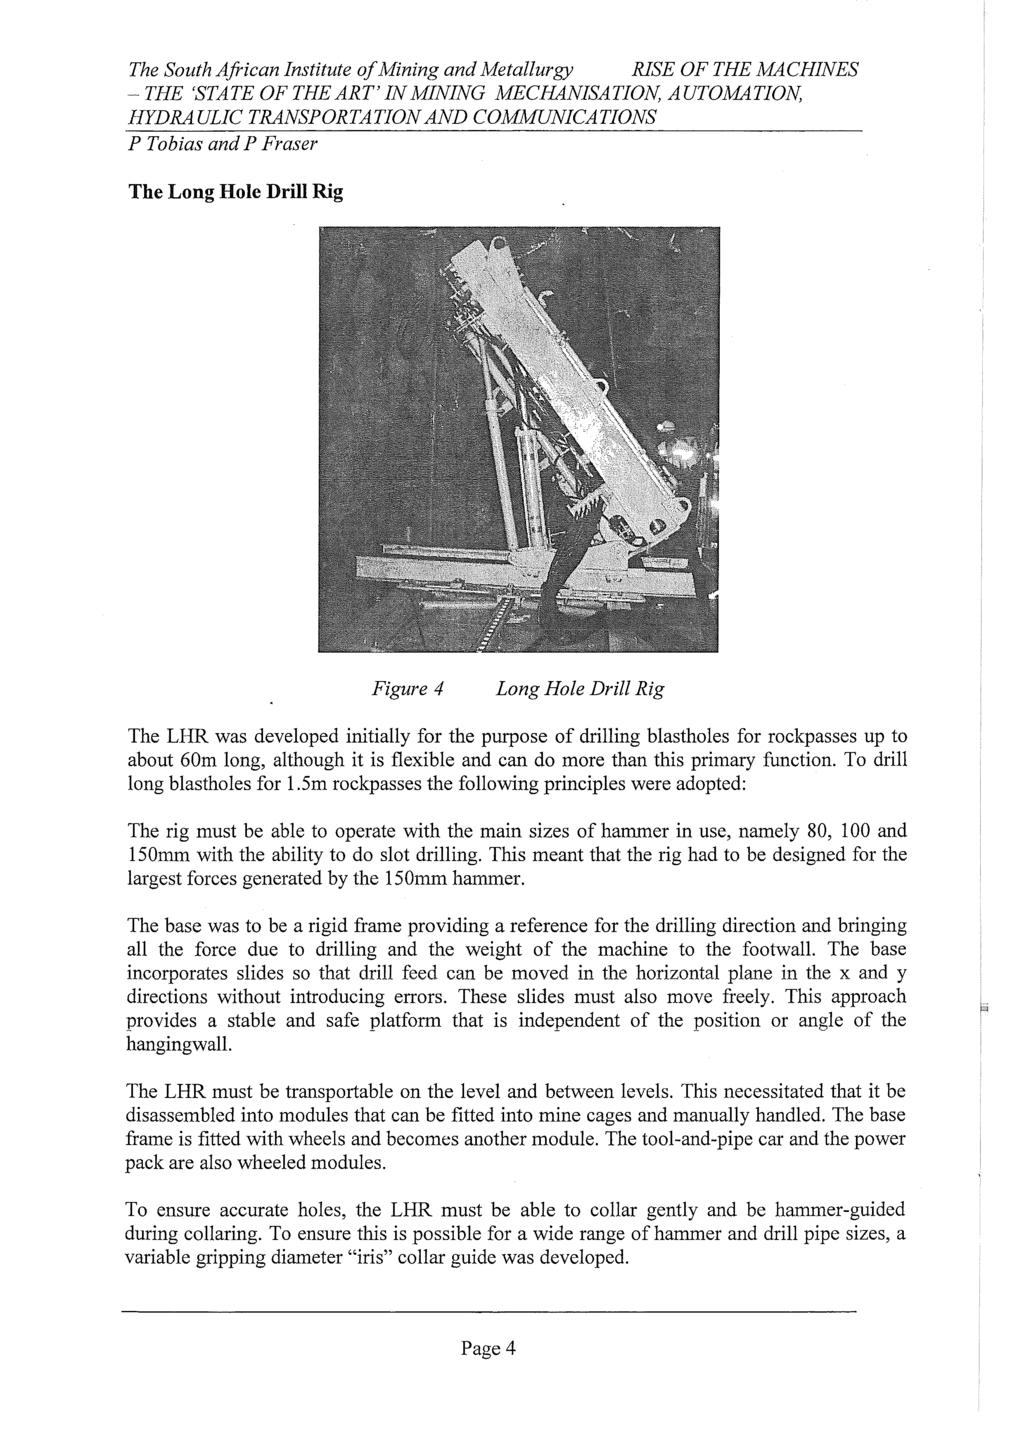 The Long Hole Drill Rig Figure 4 Long Hole Drill Rig The LHR was developed initially for the purpose of drilling blastholes for rockpasses up to about 60m long, although it is flexible and can do